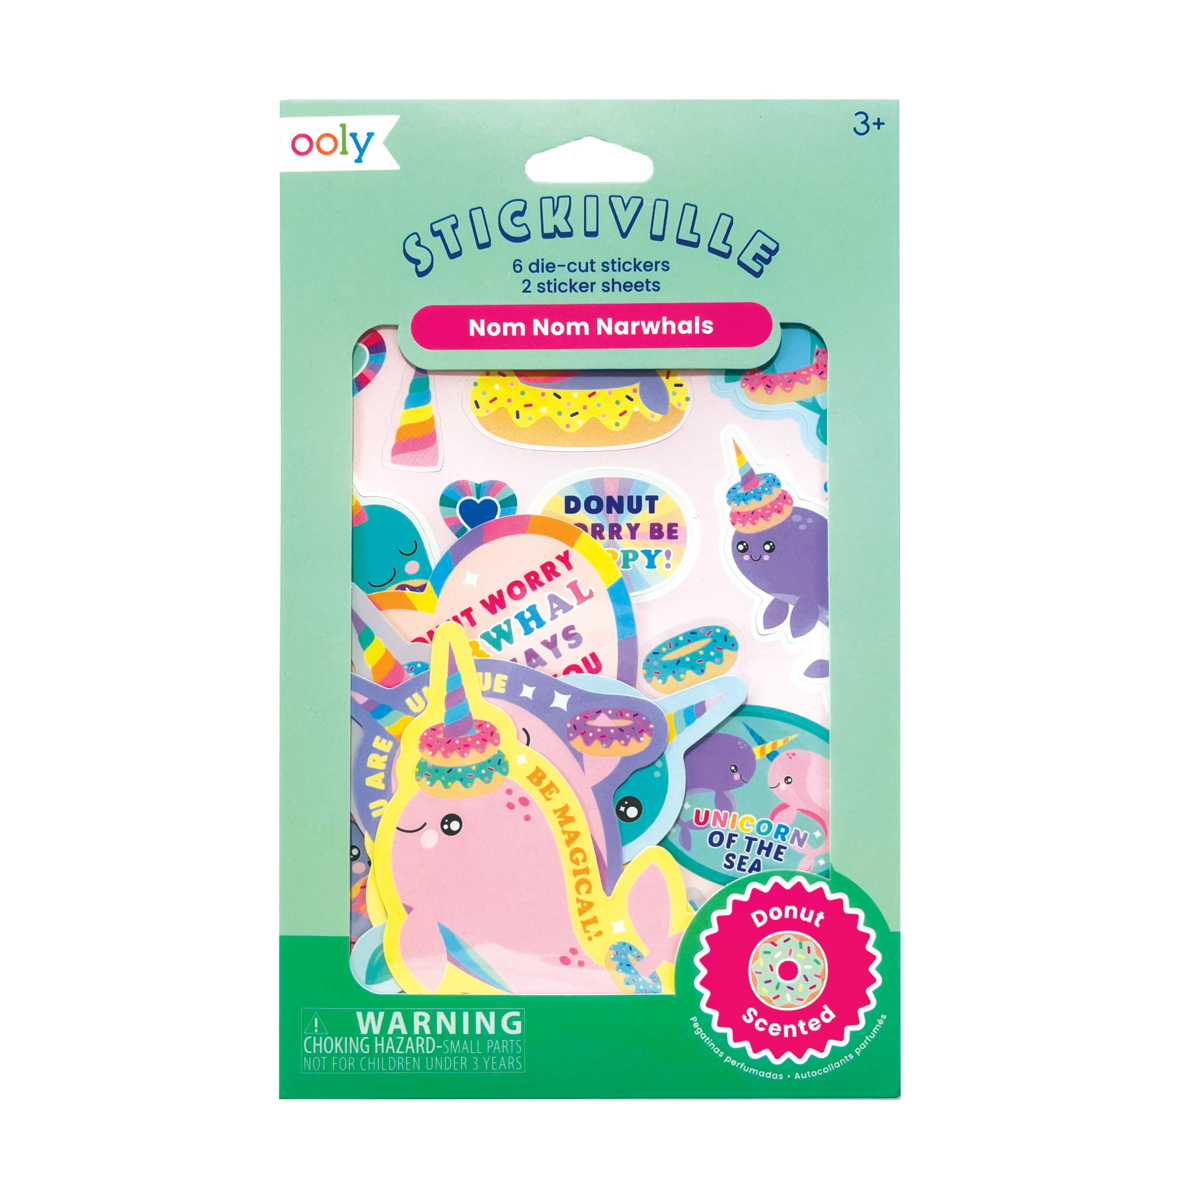 Stickiville Nom Nom Narwhals Scented Stickers in packaging